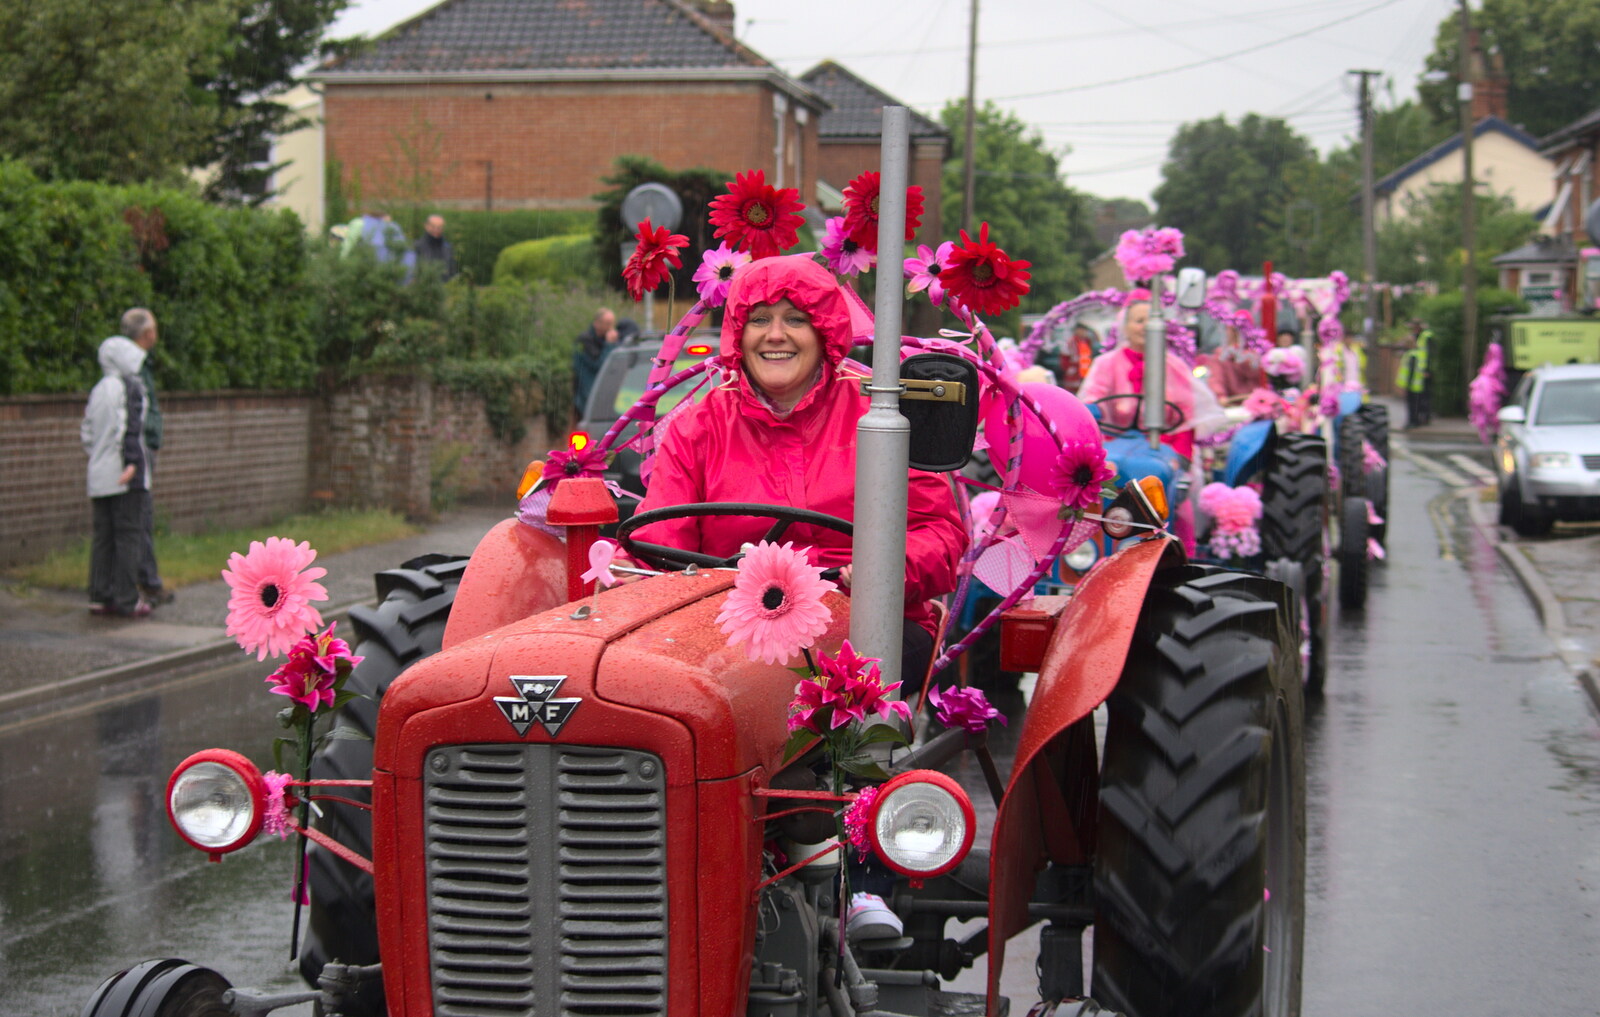 A sea of pink from The Pink Ladies Tractor Run, Harleston and Gawdy Park, Norfolk - 5th July 2015